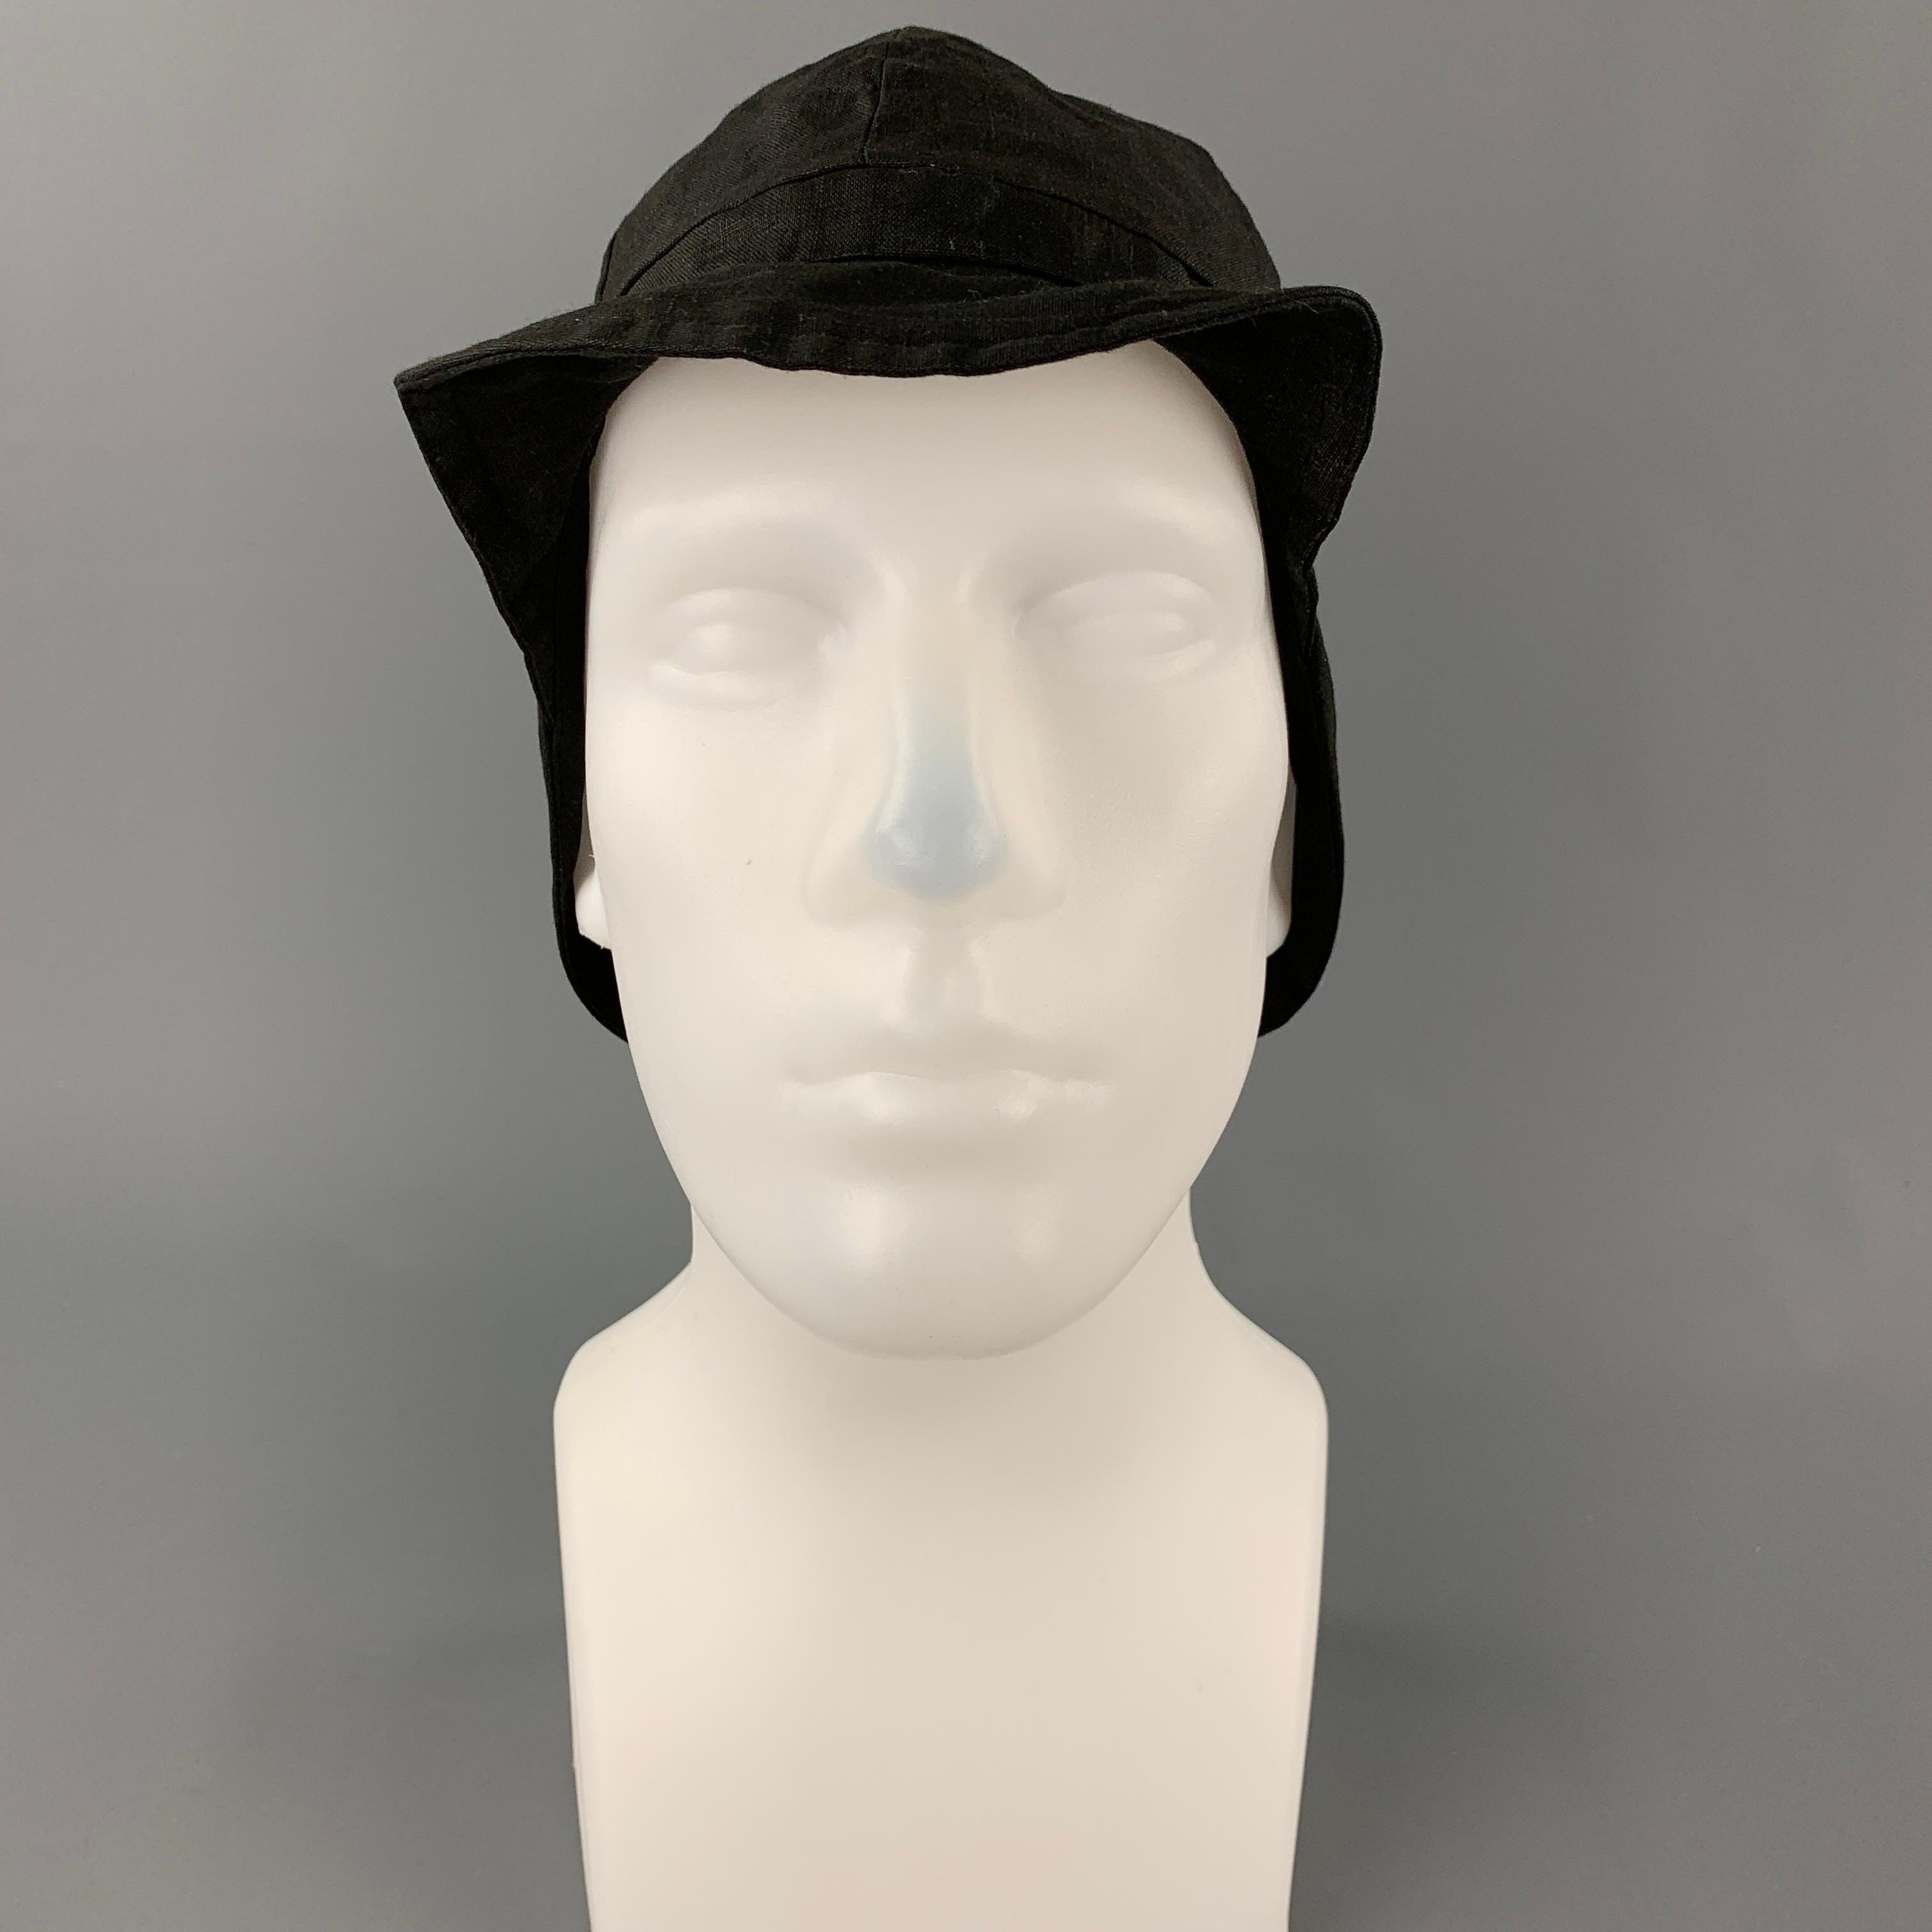 DER ANTAGONIST hat comes in a black linen featuring side flaps, front brim, and a small elastic detail. Made in Germany.

Very Good Pre-Owned Condition.
Marked: 2

Measurements:

Opening: 16 in.
Brim: 2 in.
Height: 6 in. 